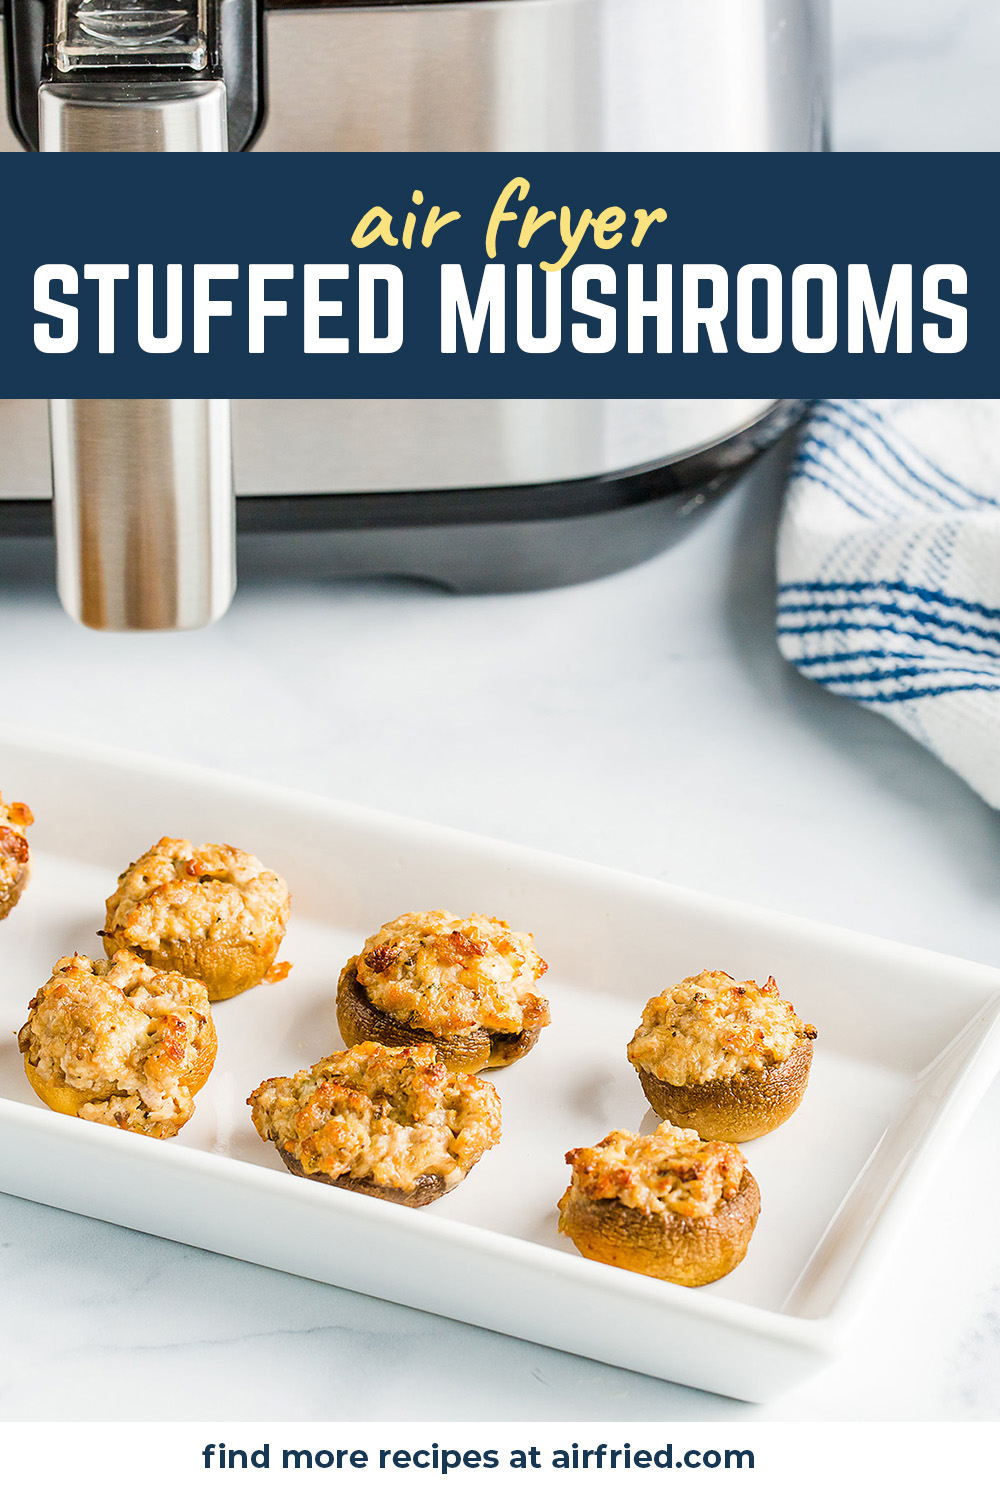 An appetizer dish with lined up stuffed mushrooms.